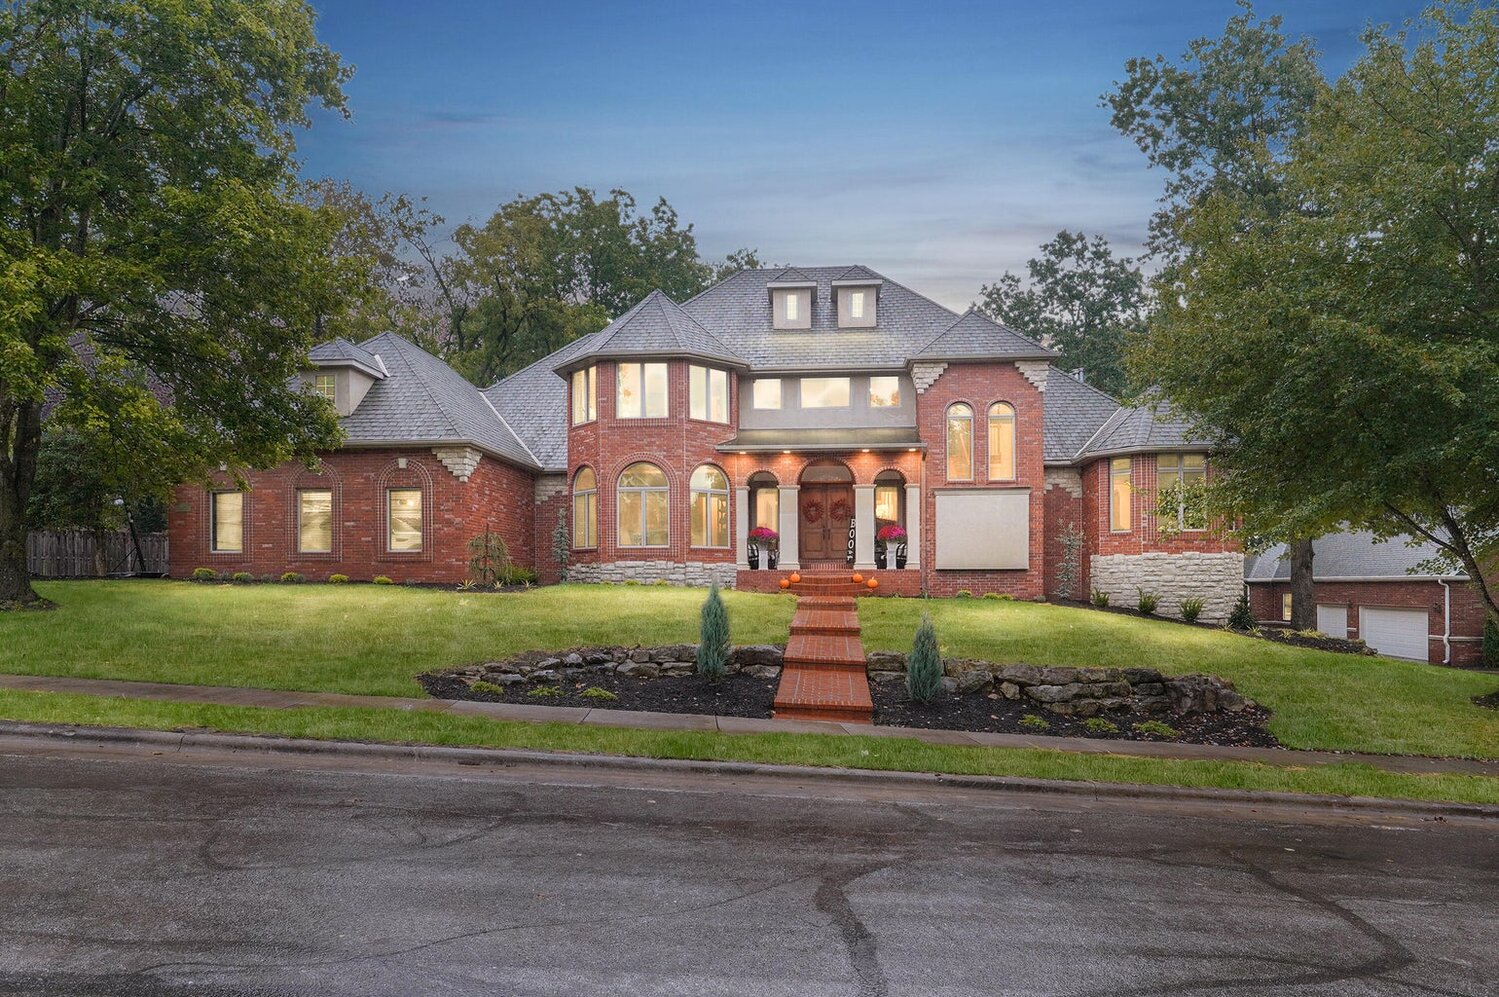 2872 S. Forrest Heights Ave.
$825,000
Bedrooms: 5
Bathrooms: 5
Listing firm: Alpha Realty MO LLC